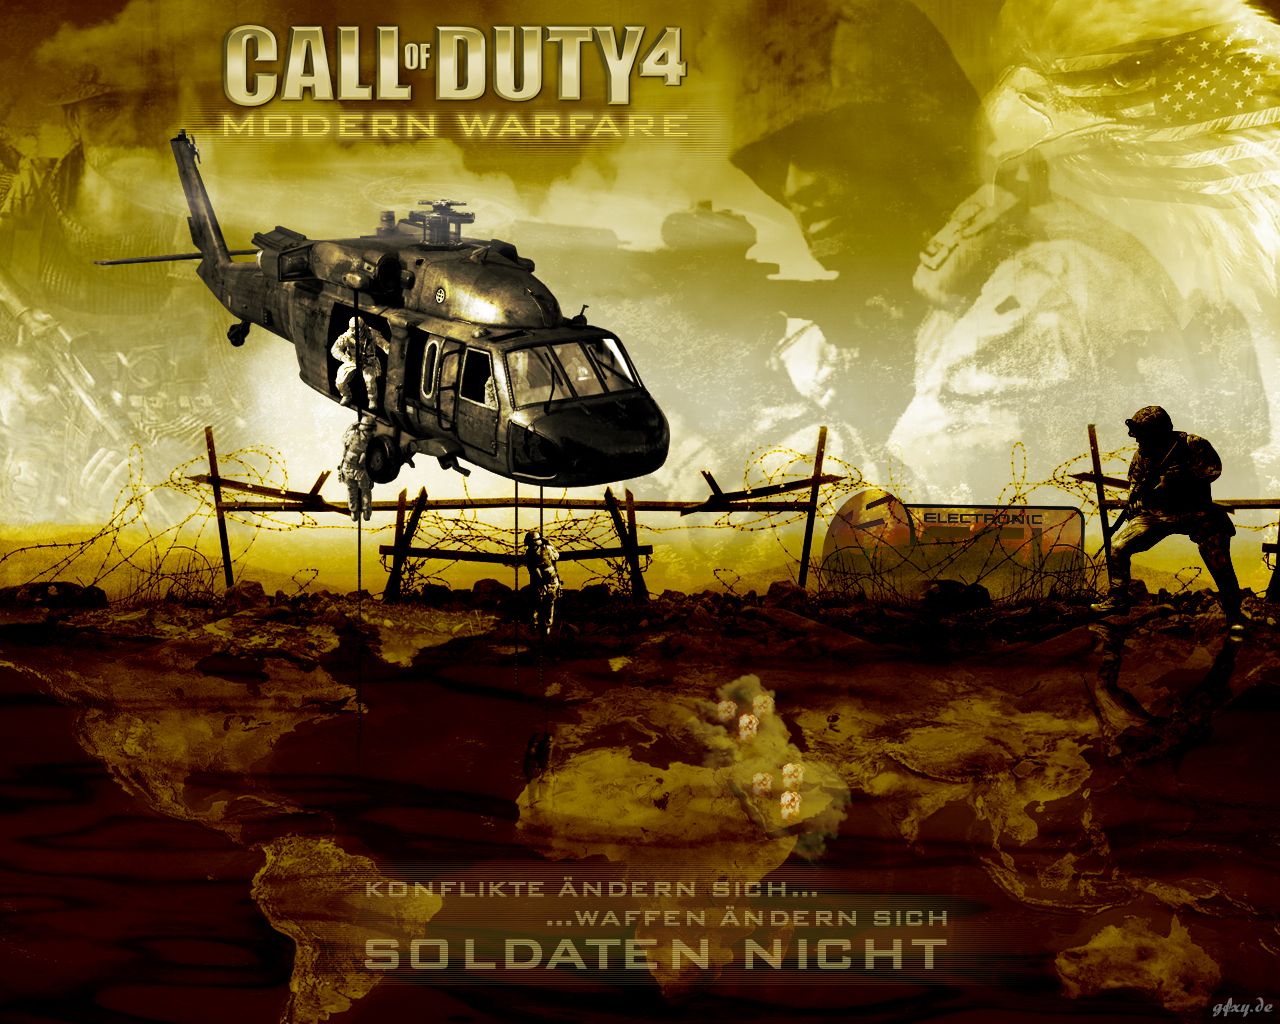 pic new posts: Call Of Duty 4 Wallpapers For Desktop